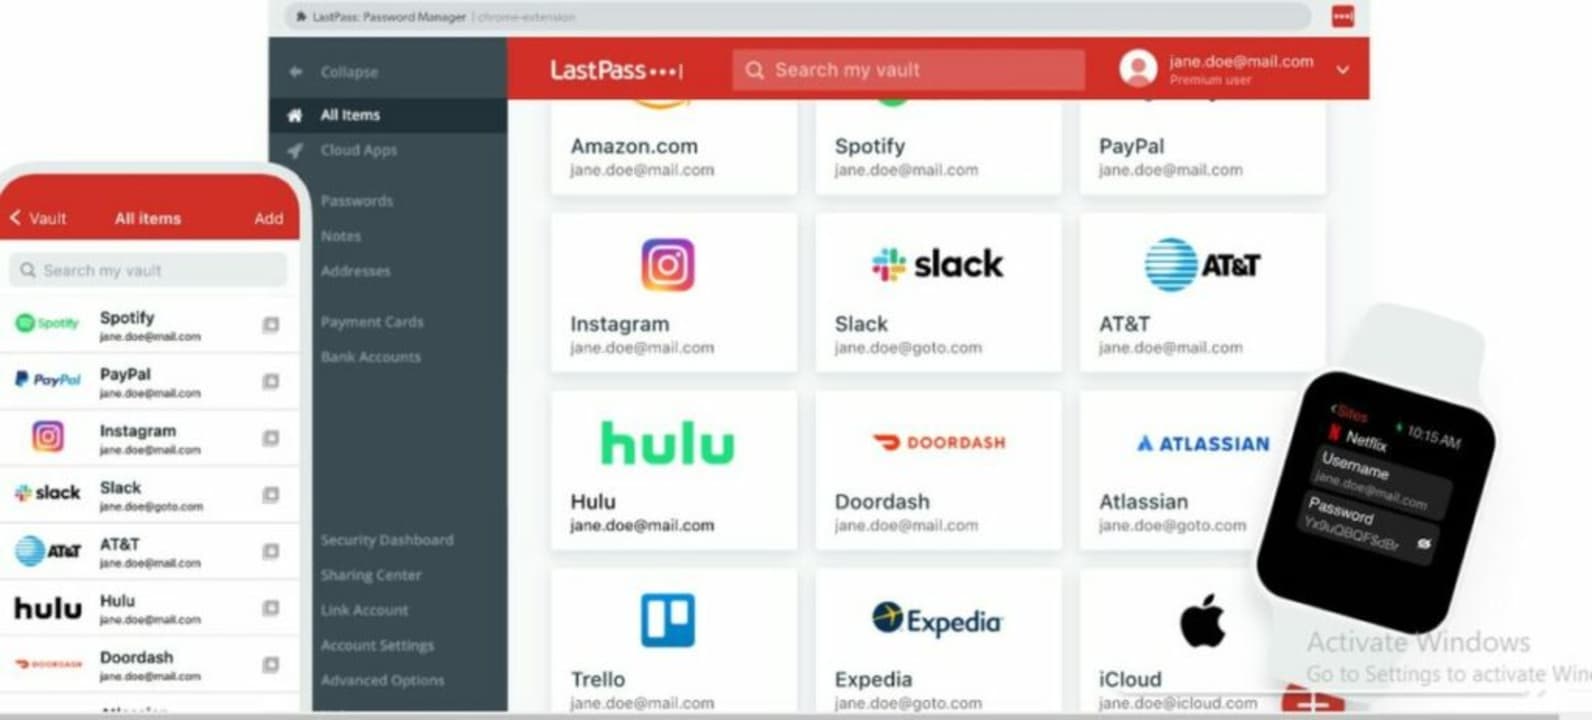 LastPass helps you organize your passwords for all your favorite apps